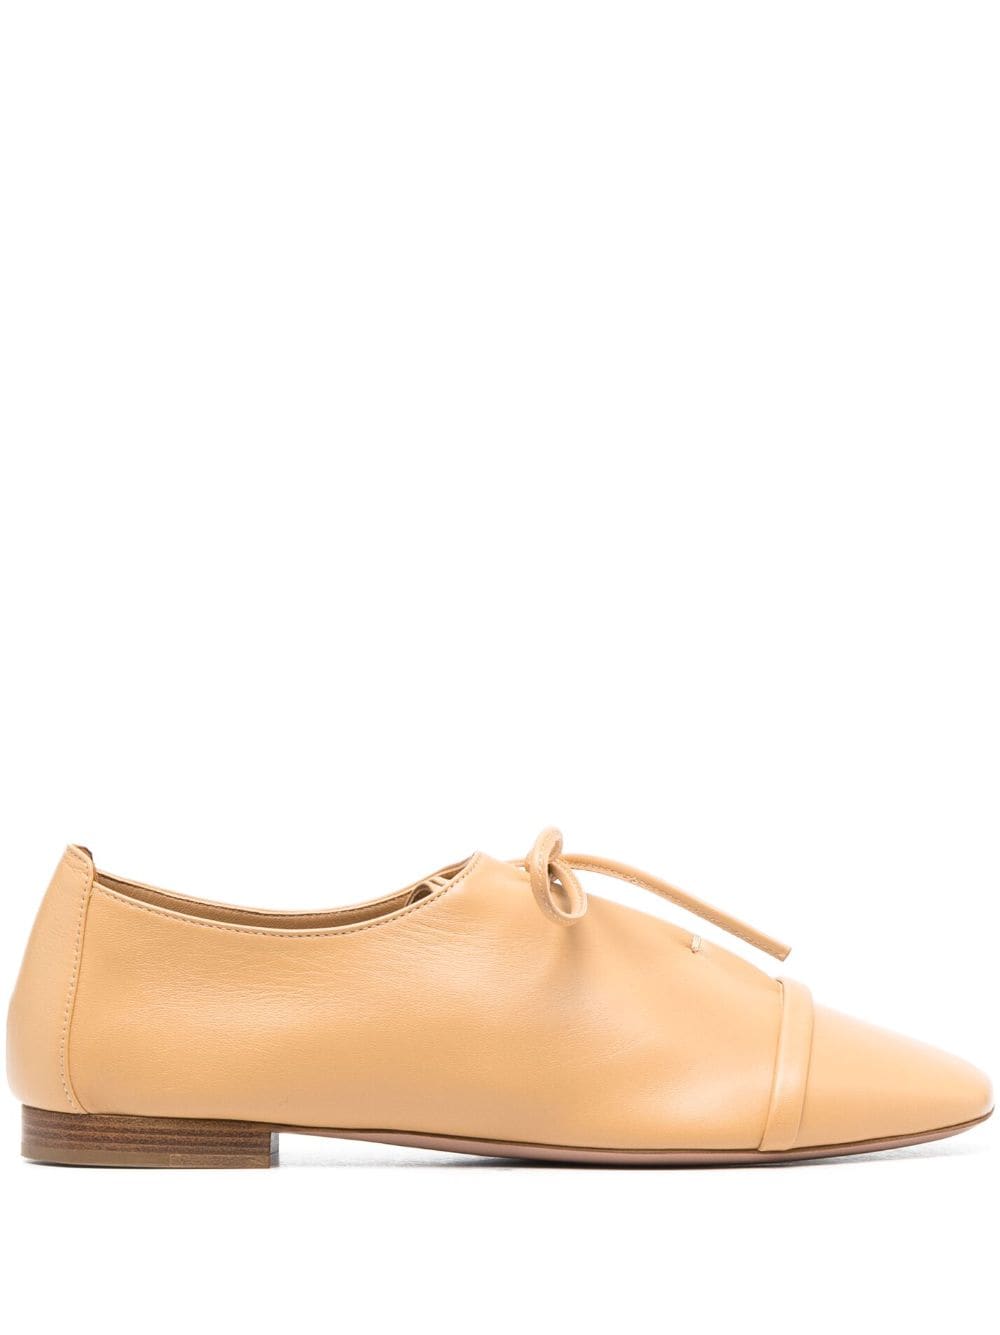 Image 1 of Malone Souliers Jean Flat lace-up leather loafers